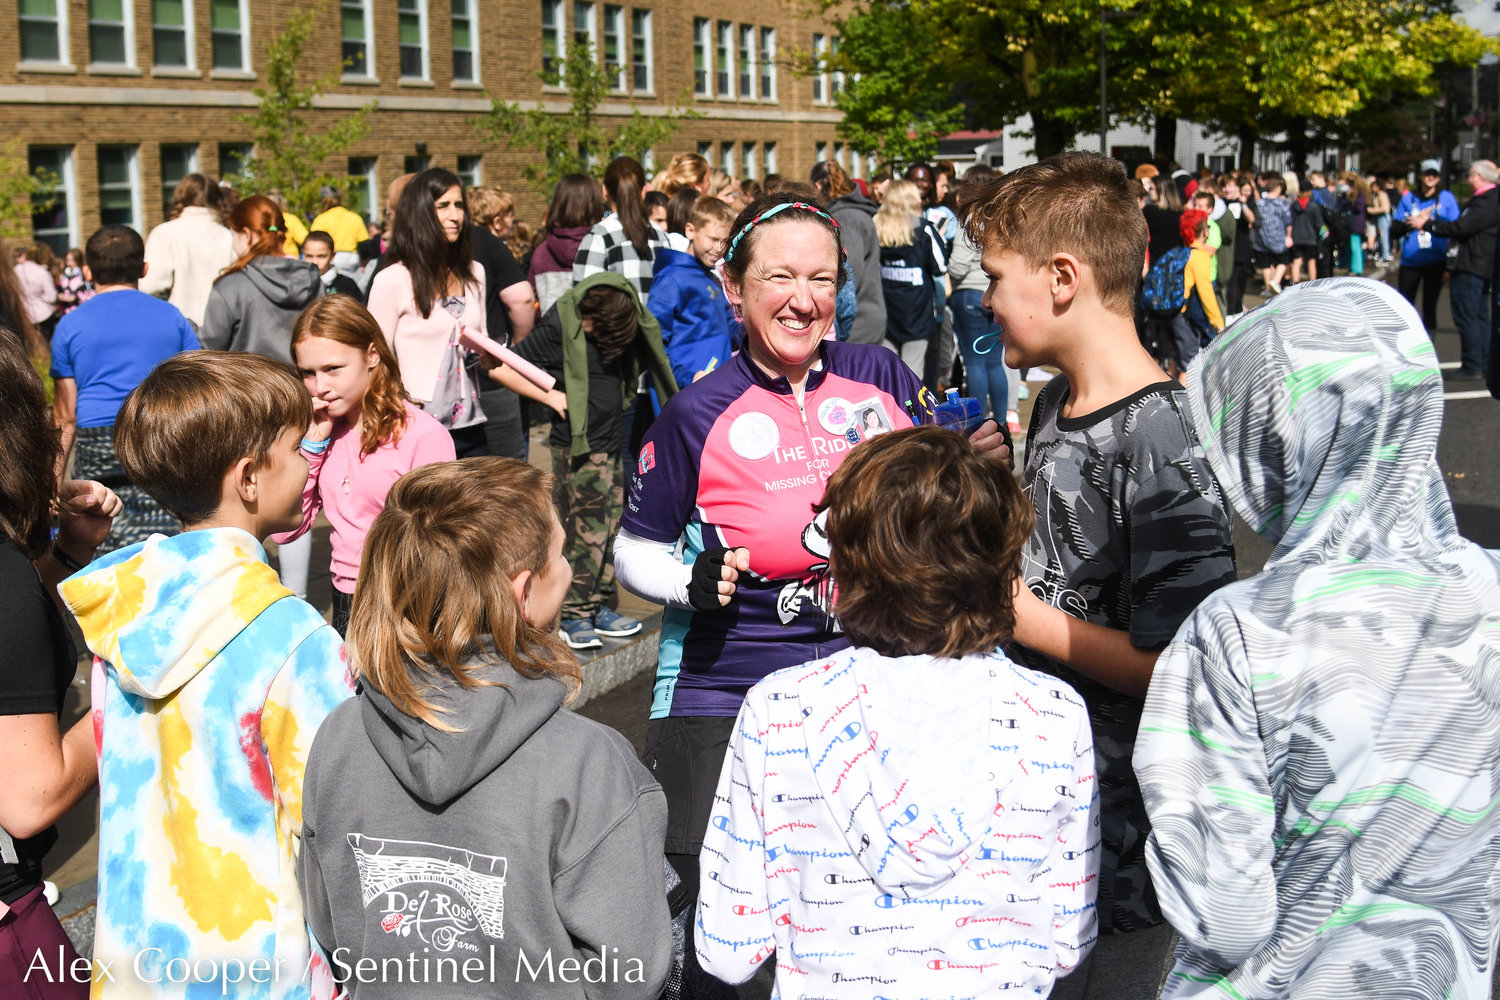 Teale Labarbera smiles and dances with students during the 24th annual Ride For Missing Children on Wednesday, Sept. 28 outside of Gregory B. Jarvis Middle School in Mohawk.